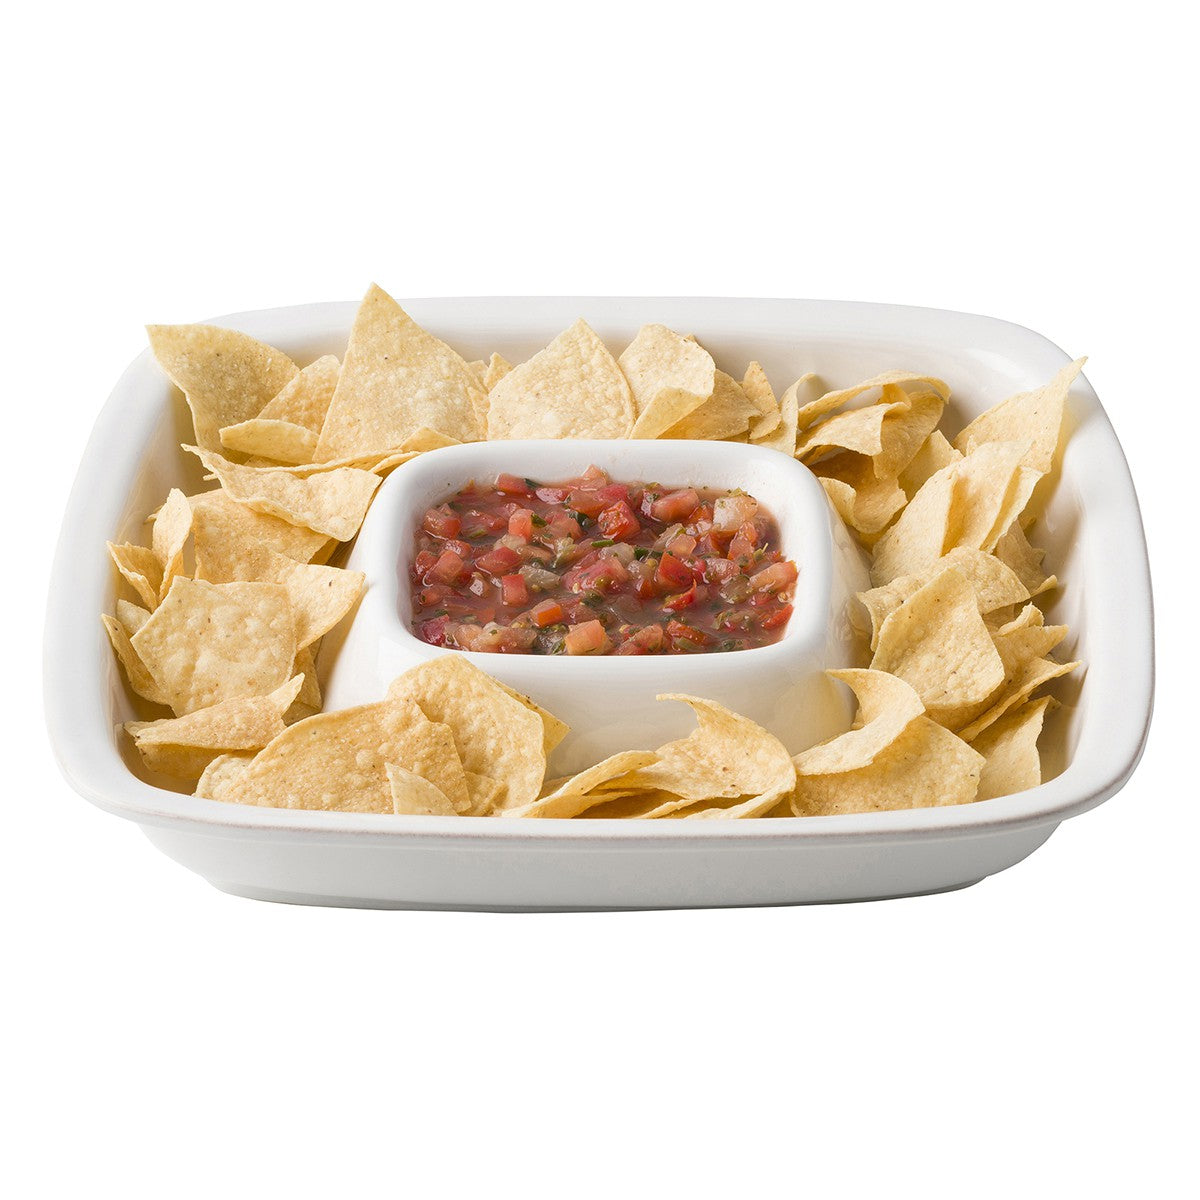 puro chip and dip tray filled with chips and salsa on a white background